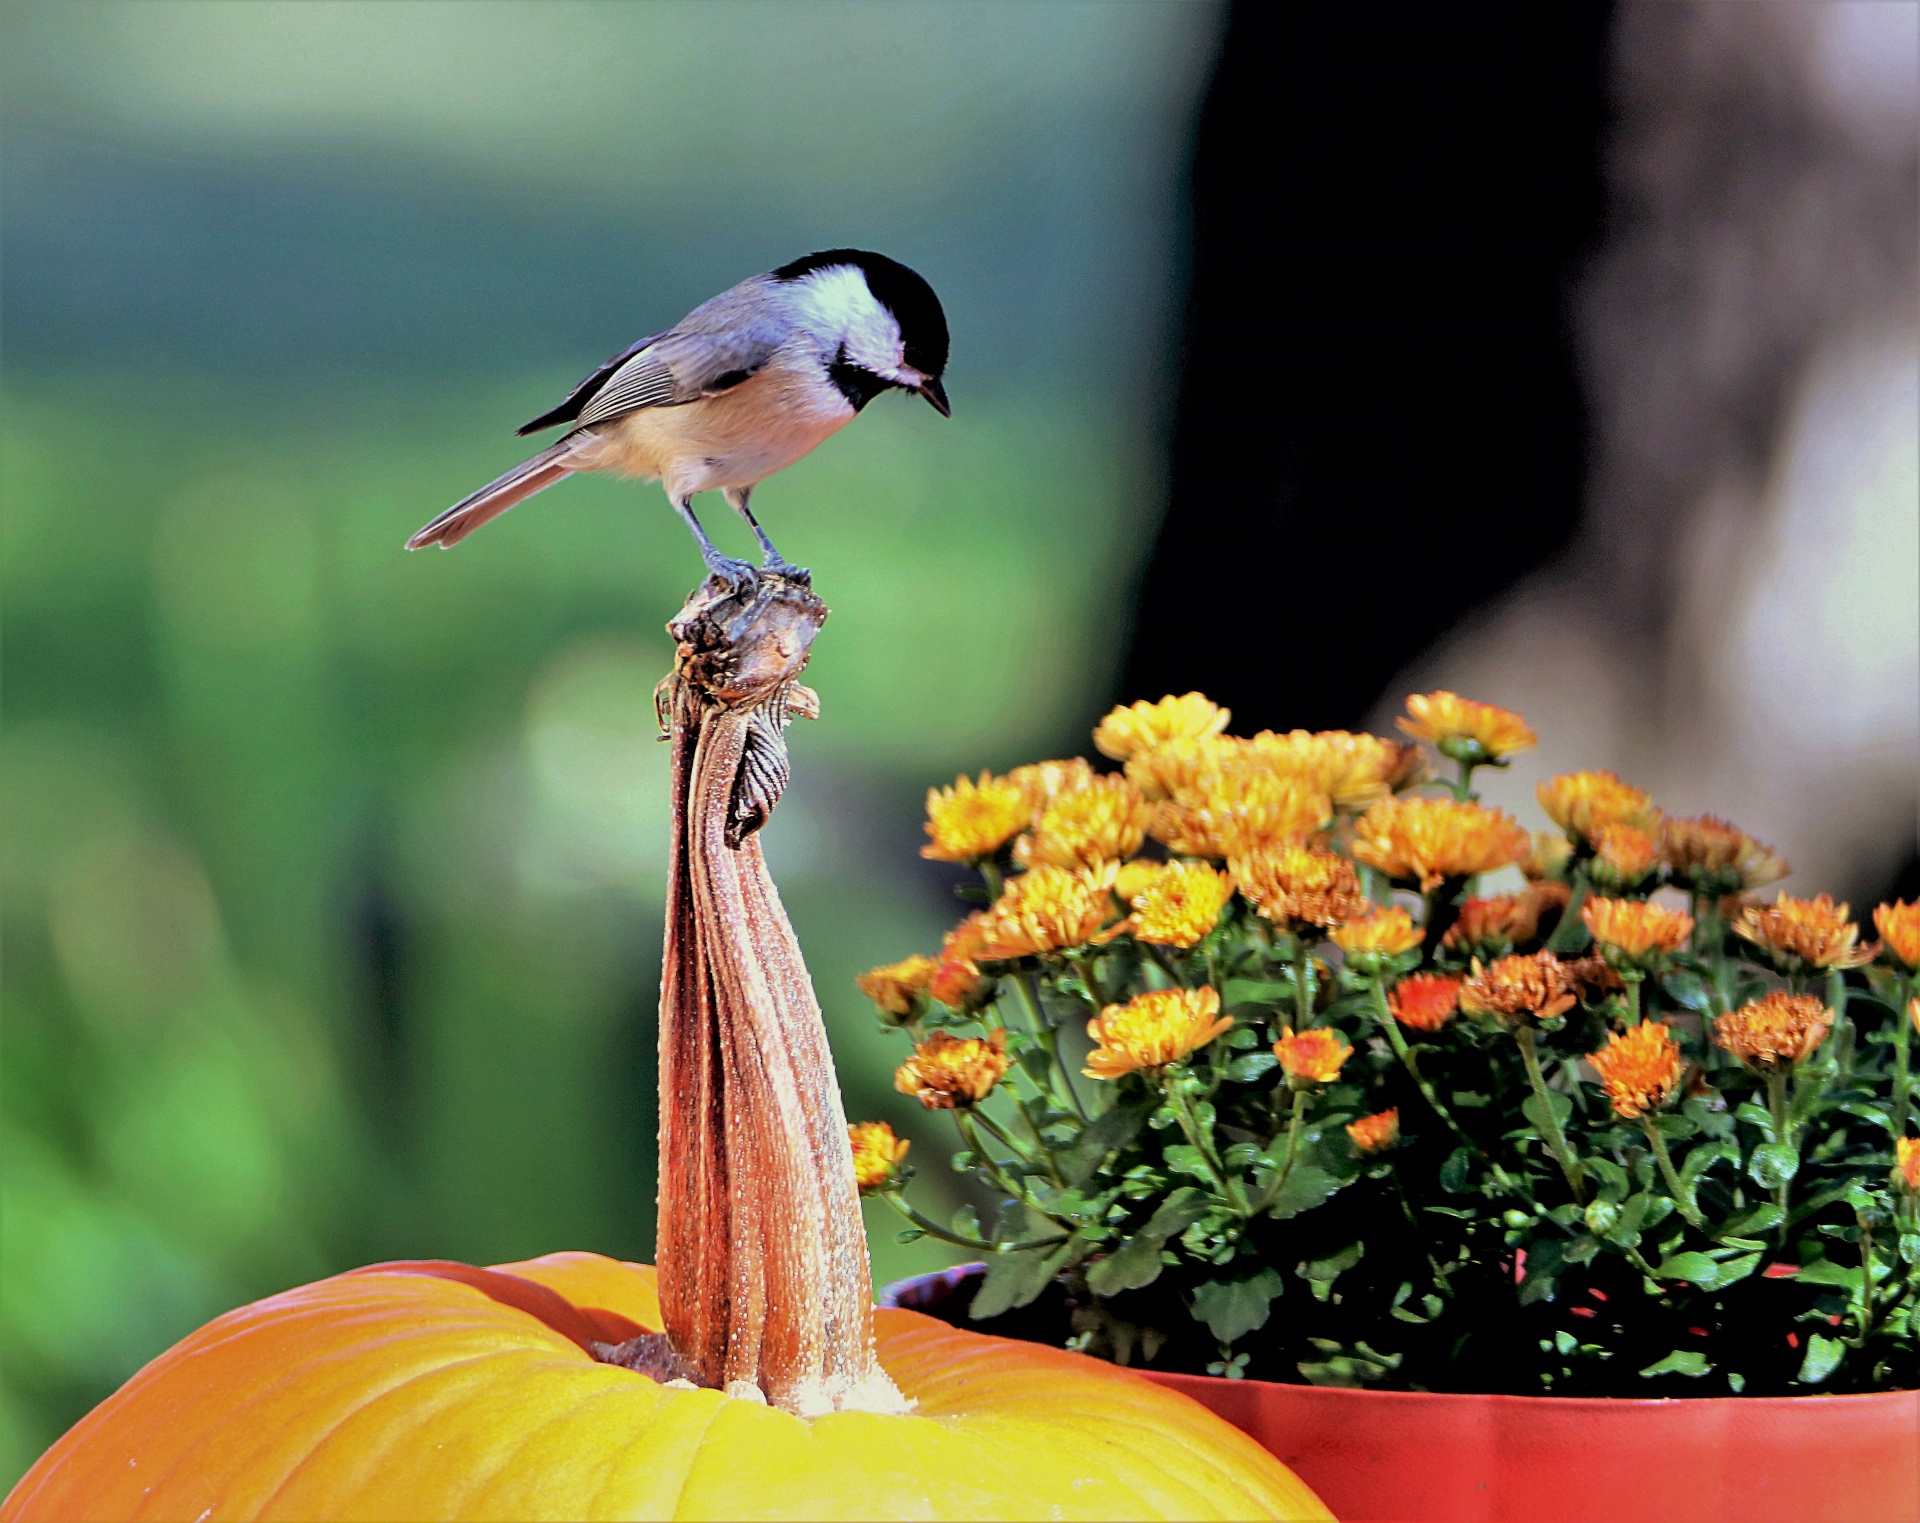 A Black-capped Chickadee perches on a pumpkin next to a planter full of orange mums.